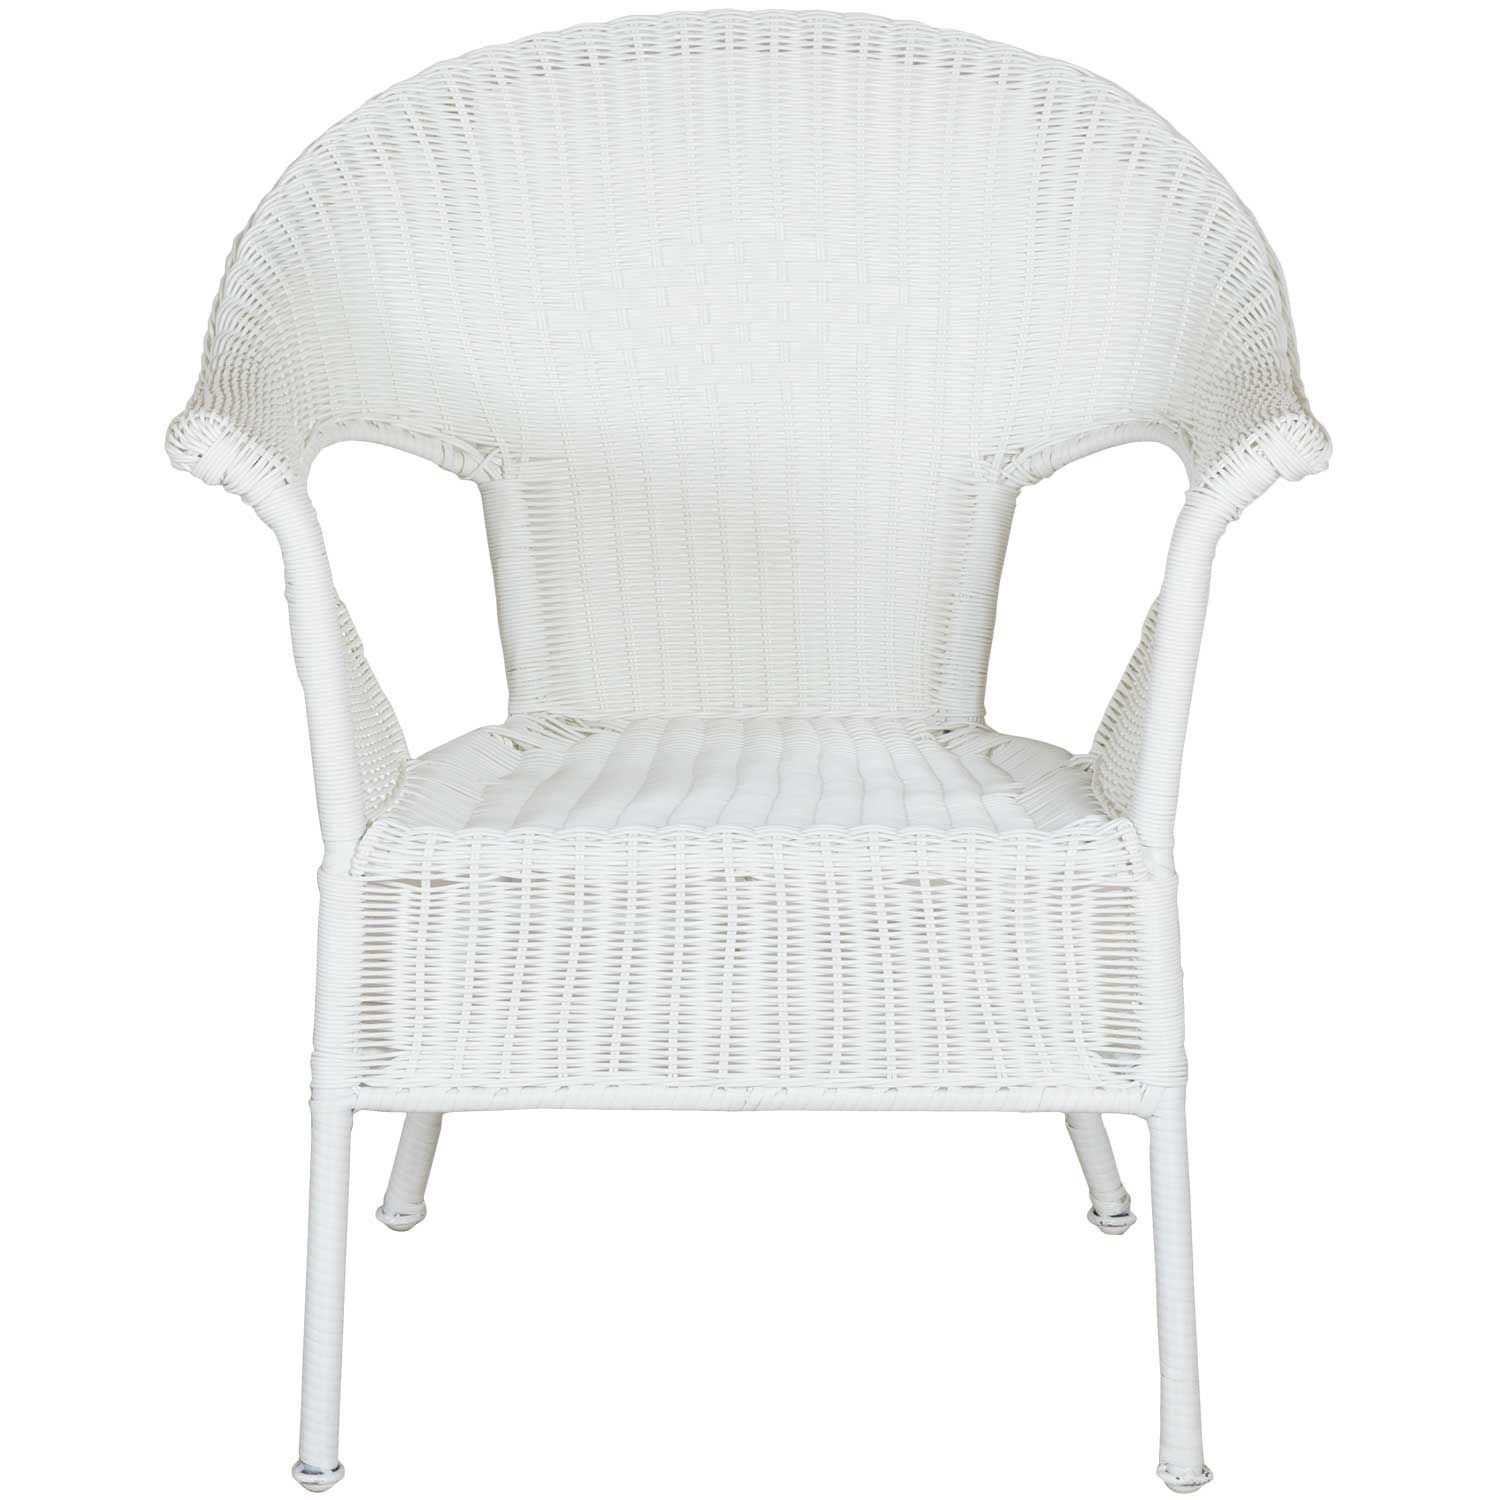 Resin Wicker Arm Chair in White CW-12282-WHT | Chi Wing | AFW.com